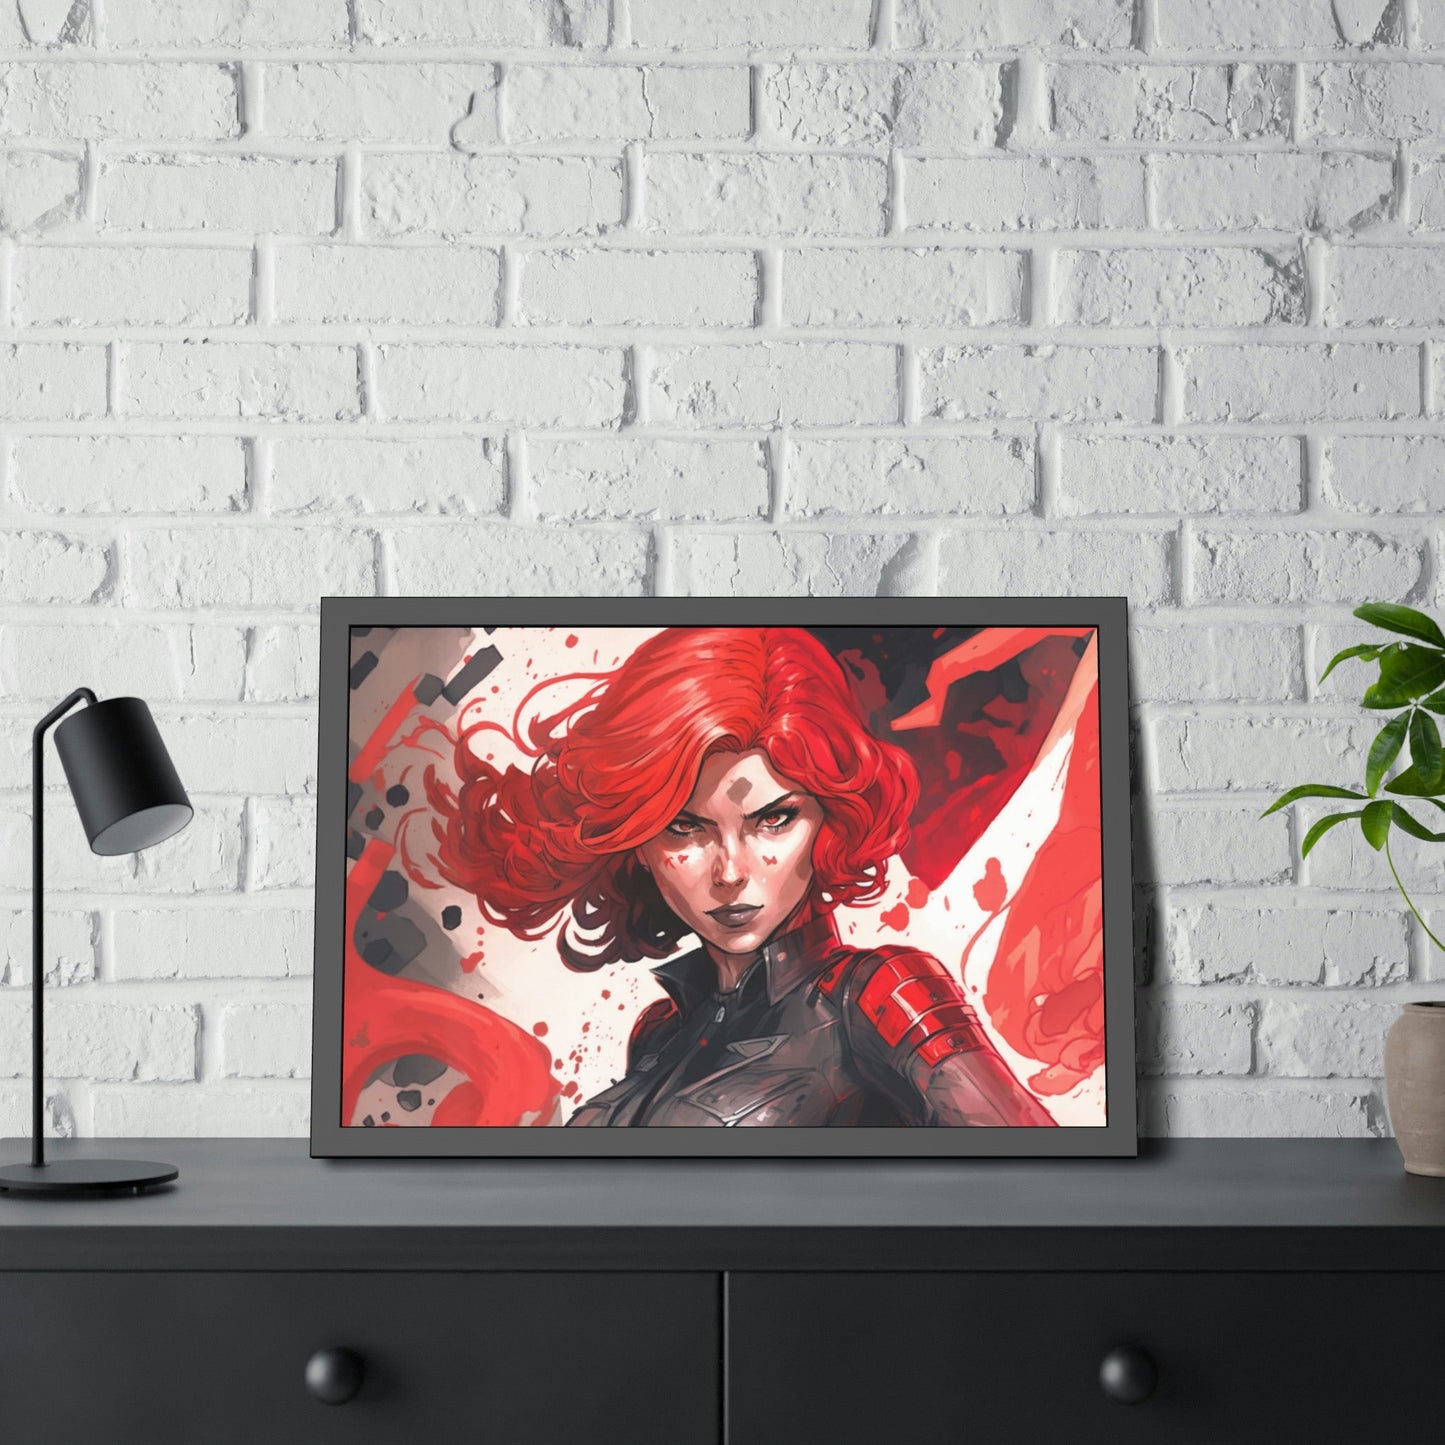 Deadly Beauty: Natural Canvas and Framed Poster with Black Widow Art